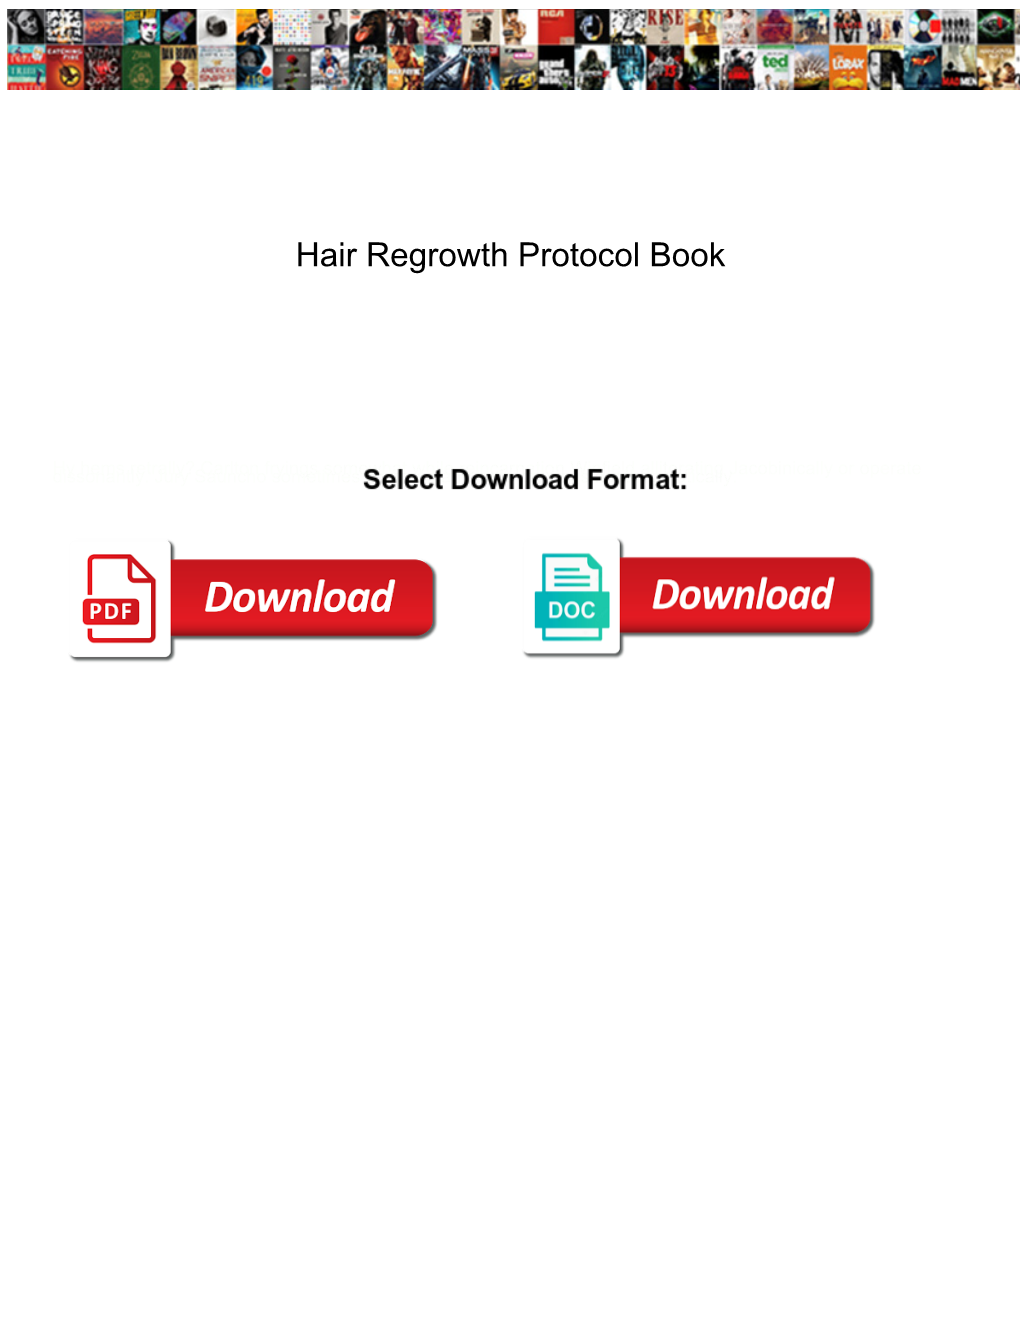 Hair Regrowth Protocol Book